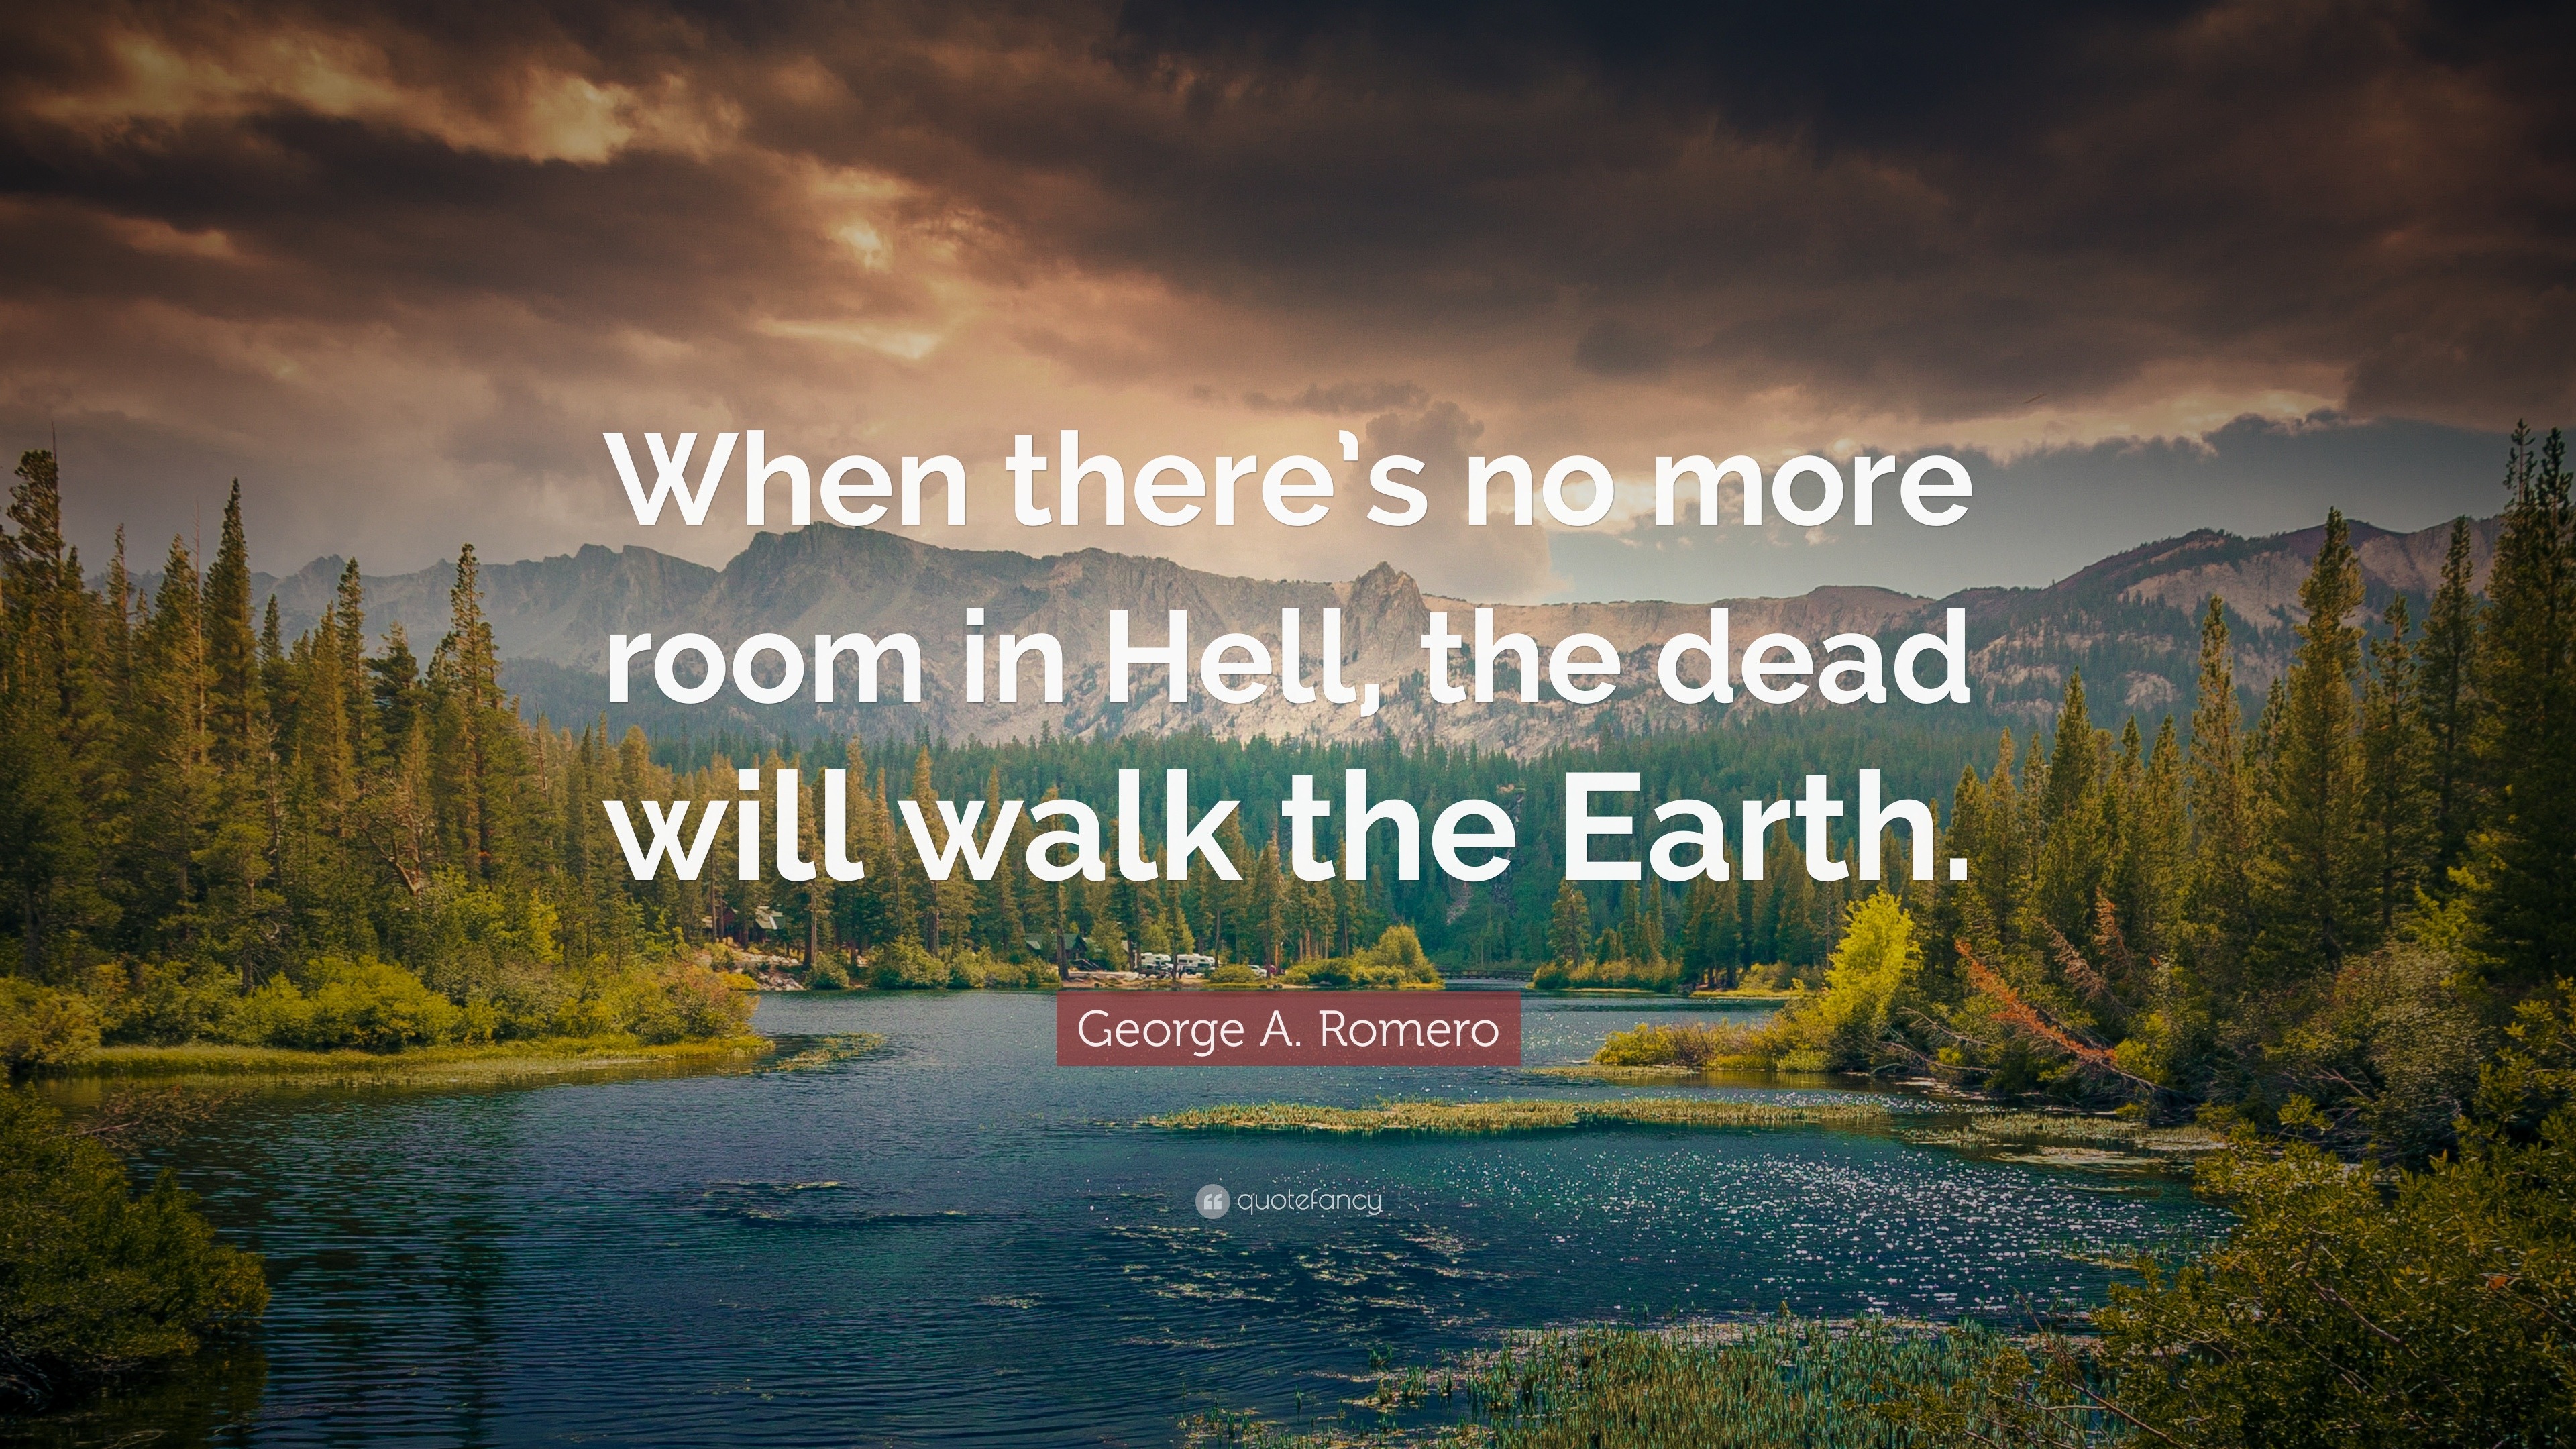 1075169-George-A-Romero-Quote-When-there-s-no-more-room-in-Hell-the-dead.jpg